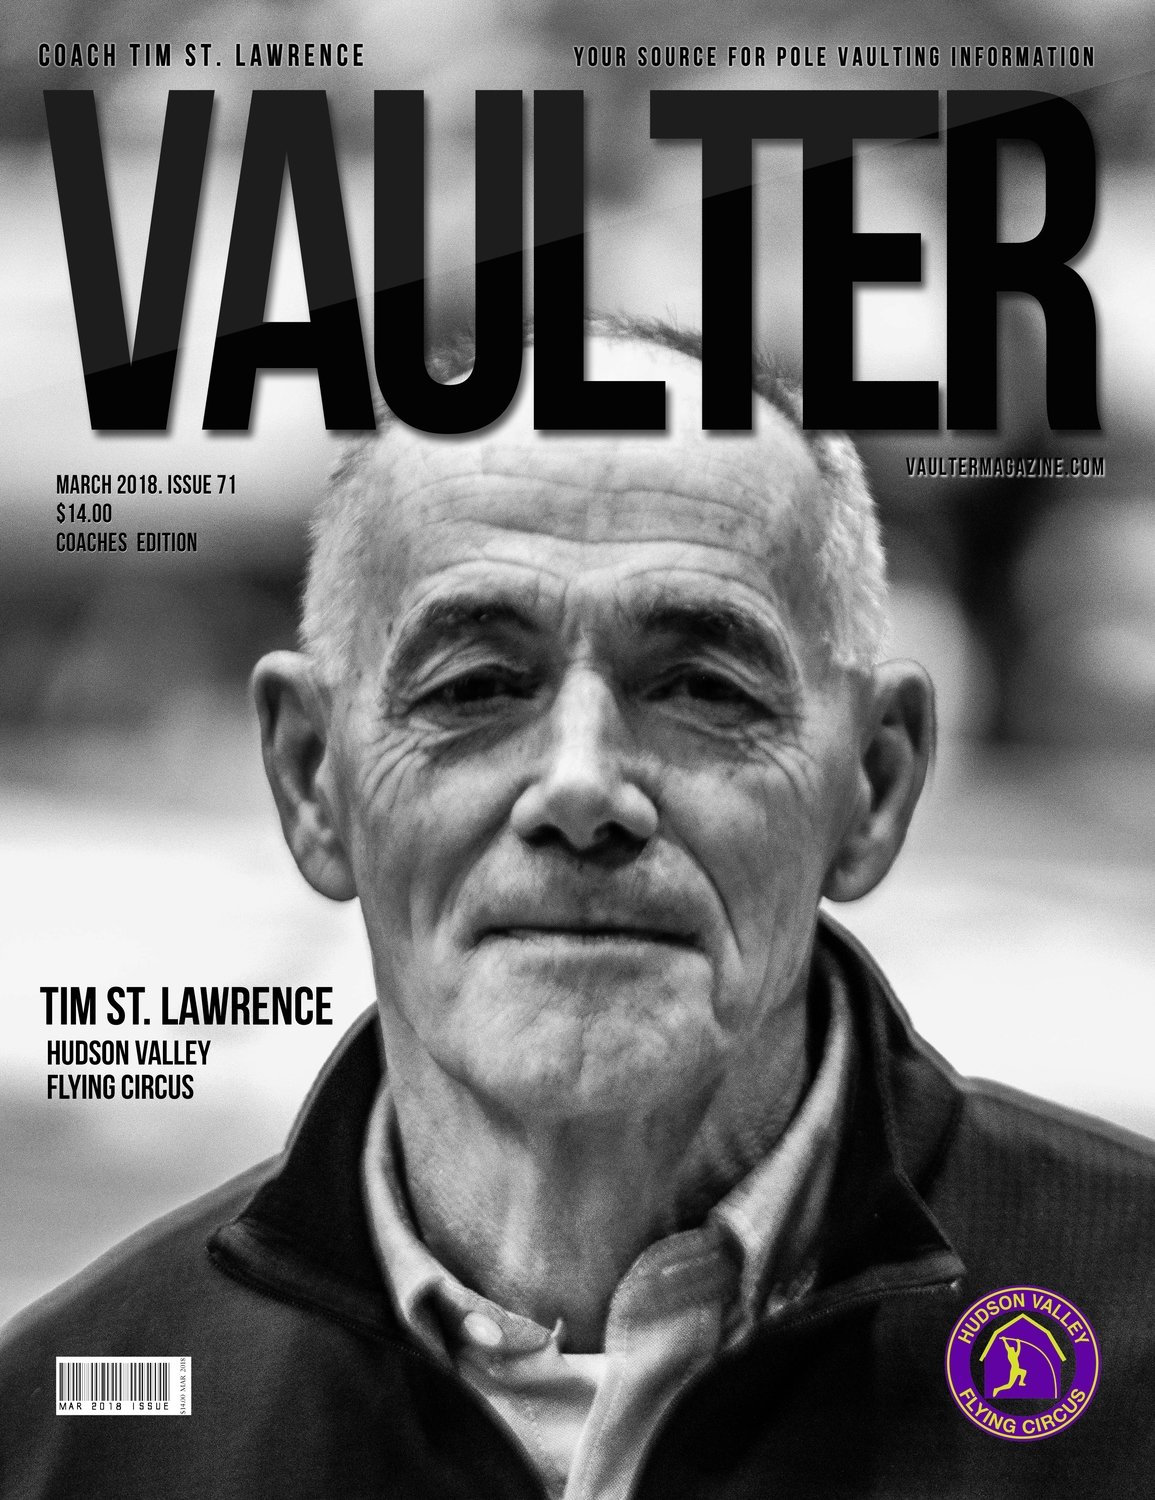 March 2018 Coach Tim St. Lawrence Issue of Vaulter Magazine Cover USPS Mail